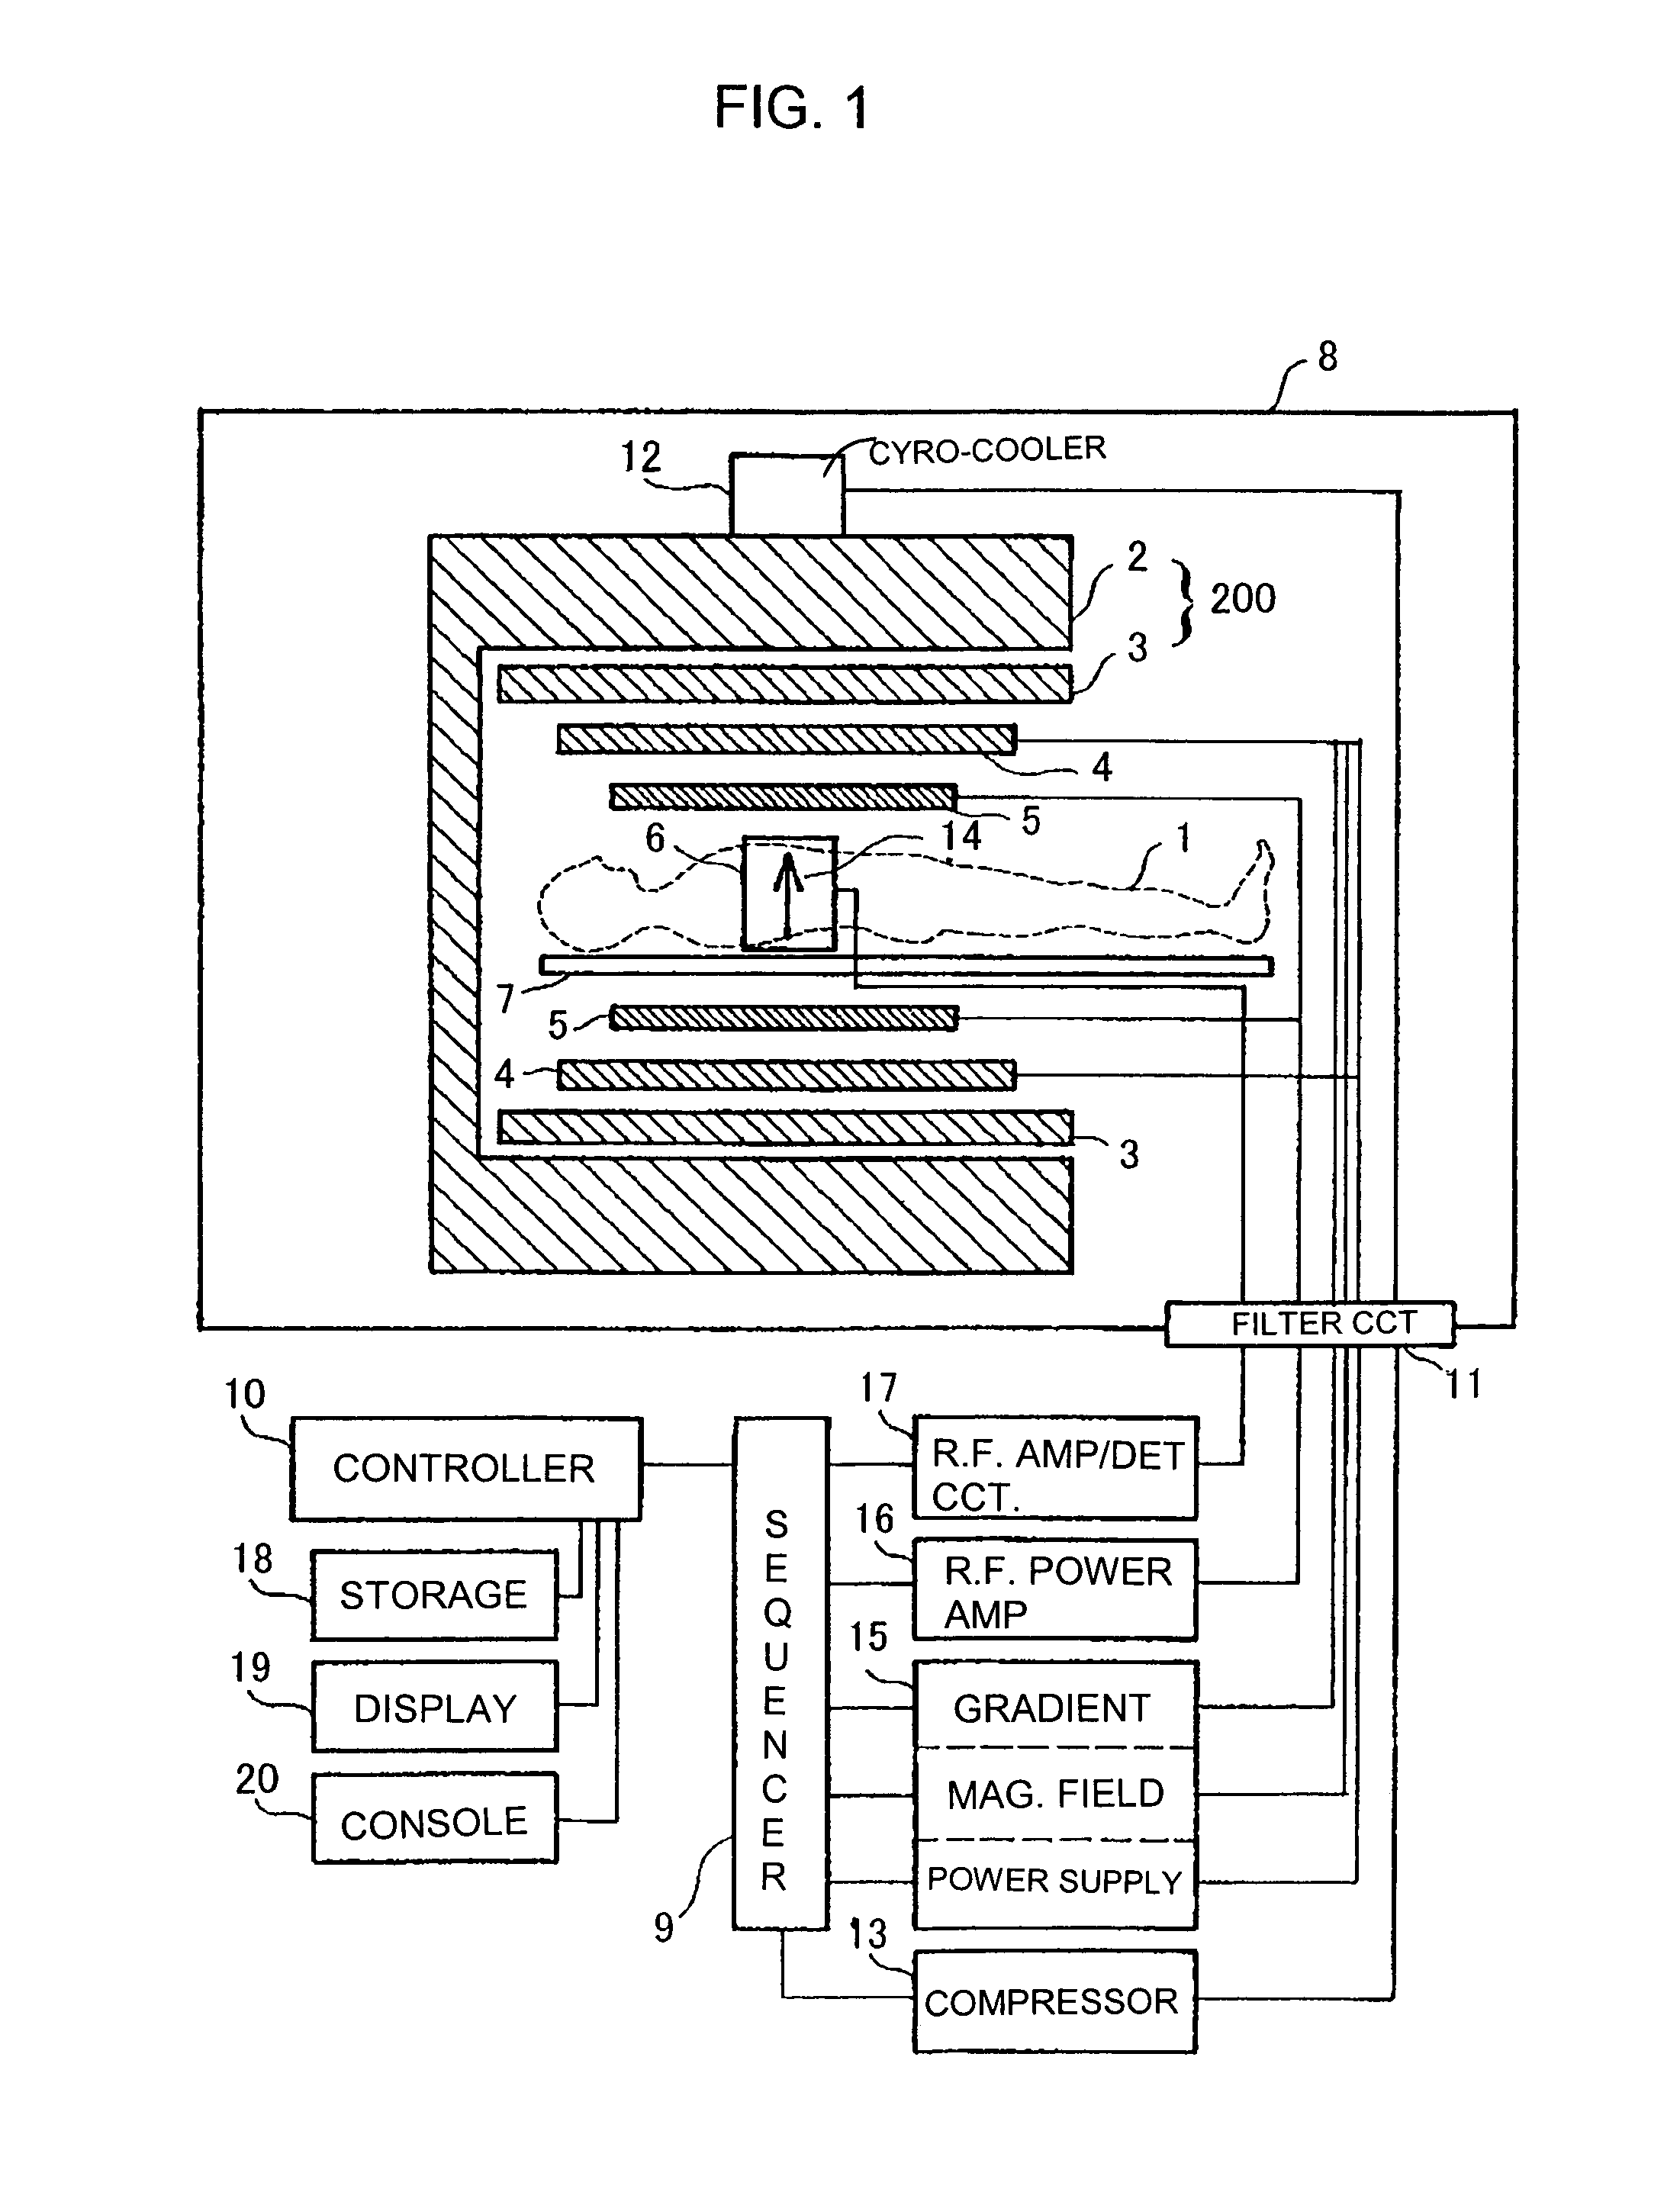 MRI apparatus correcting vibratory static magnetic field fluctuations, by utilizing the static magnetic fluctuation itself